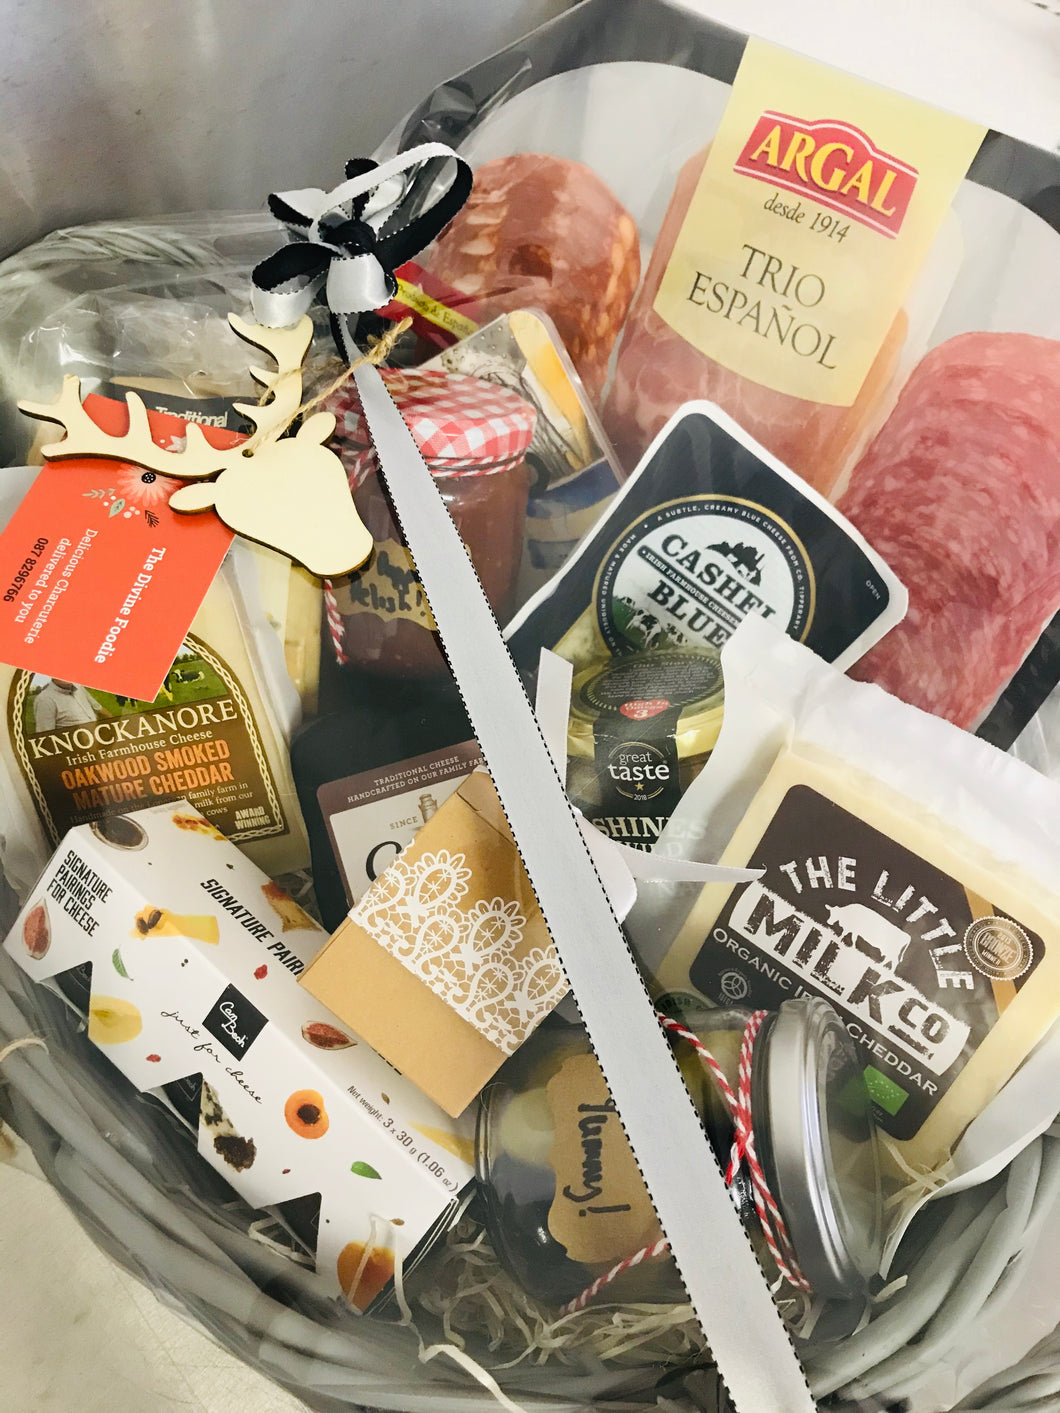 The Cheese gift hamper